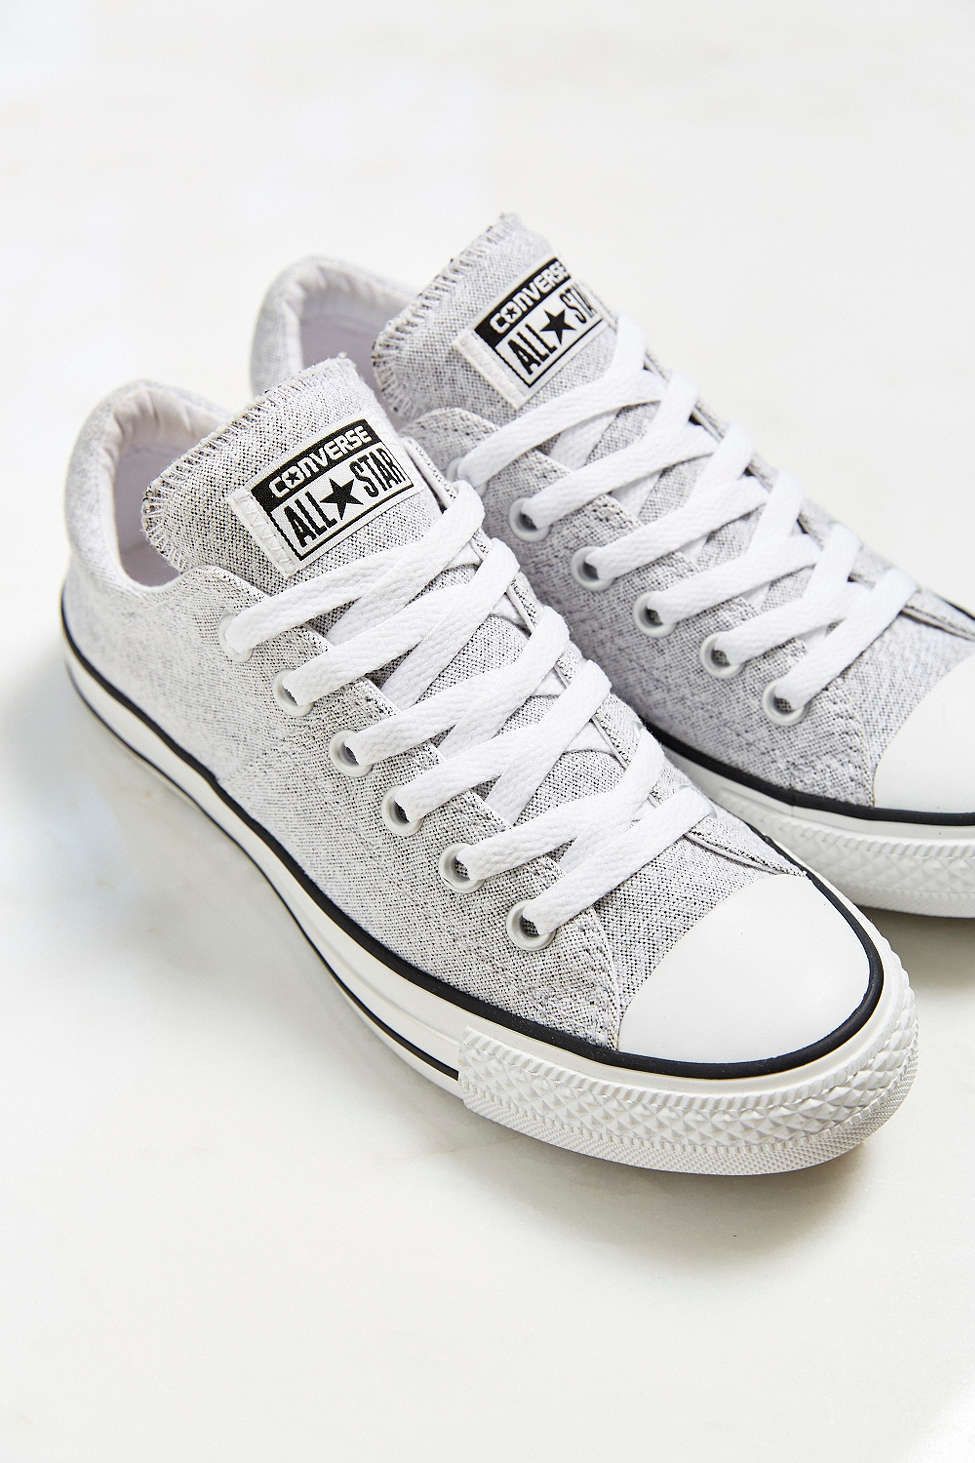 Converse Chuck Taylor All-Star Heathered Sneaker // Urban Outfitters